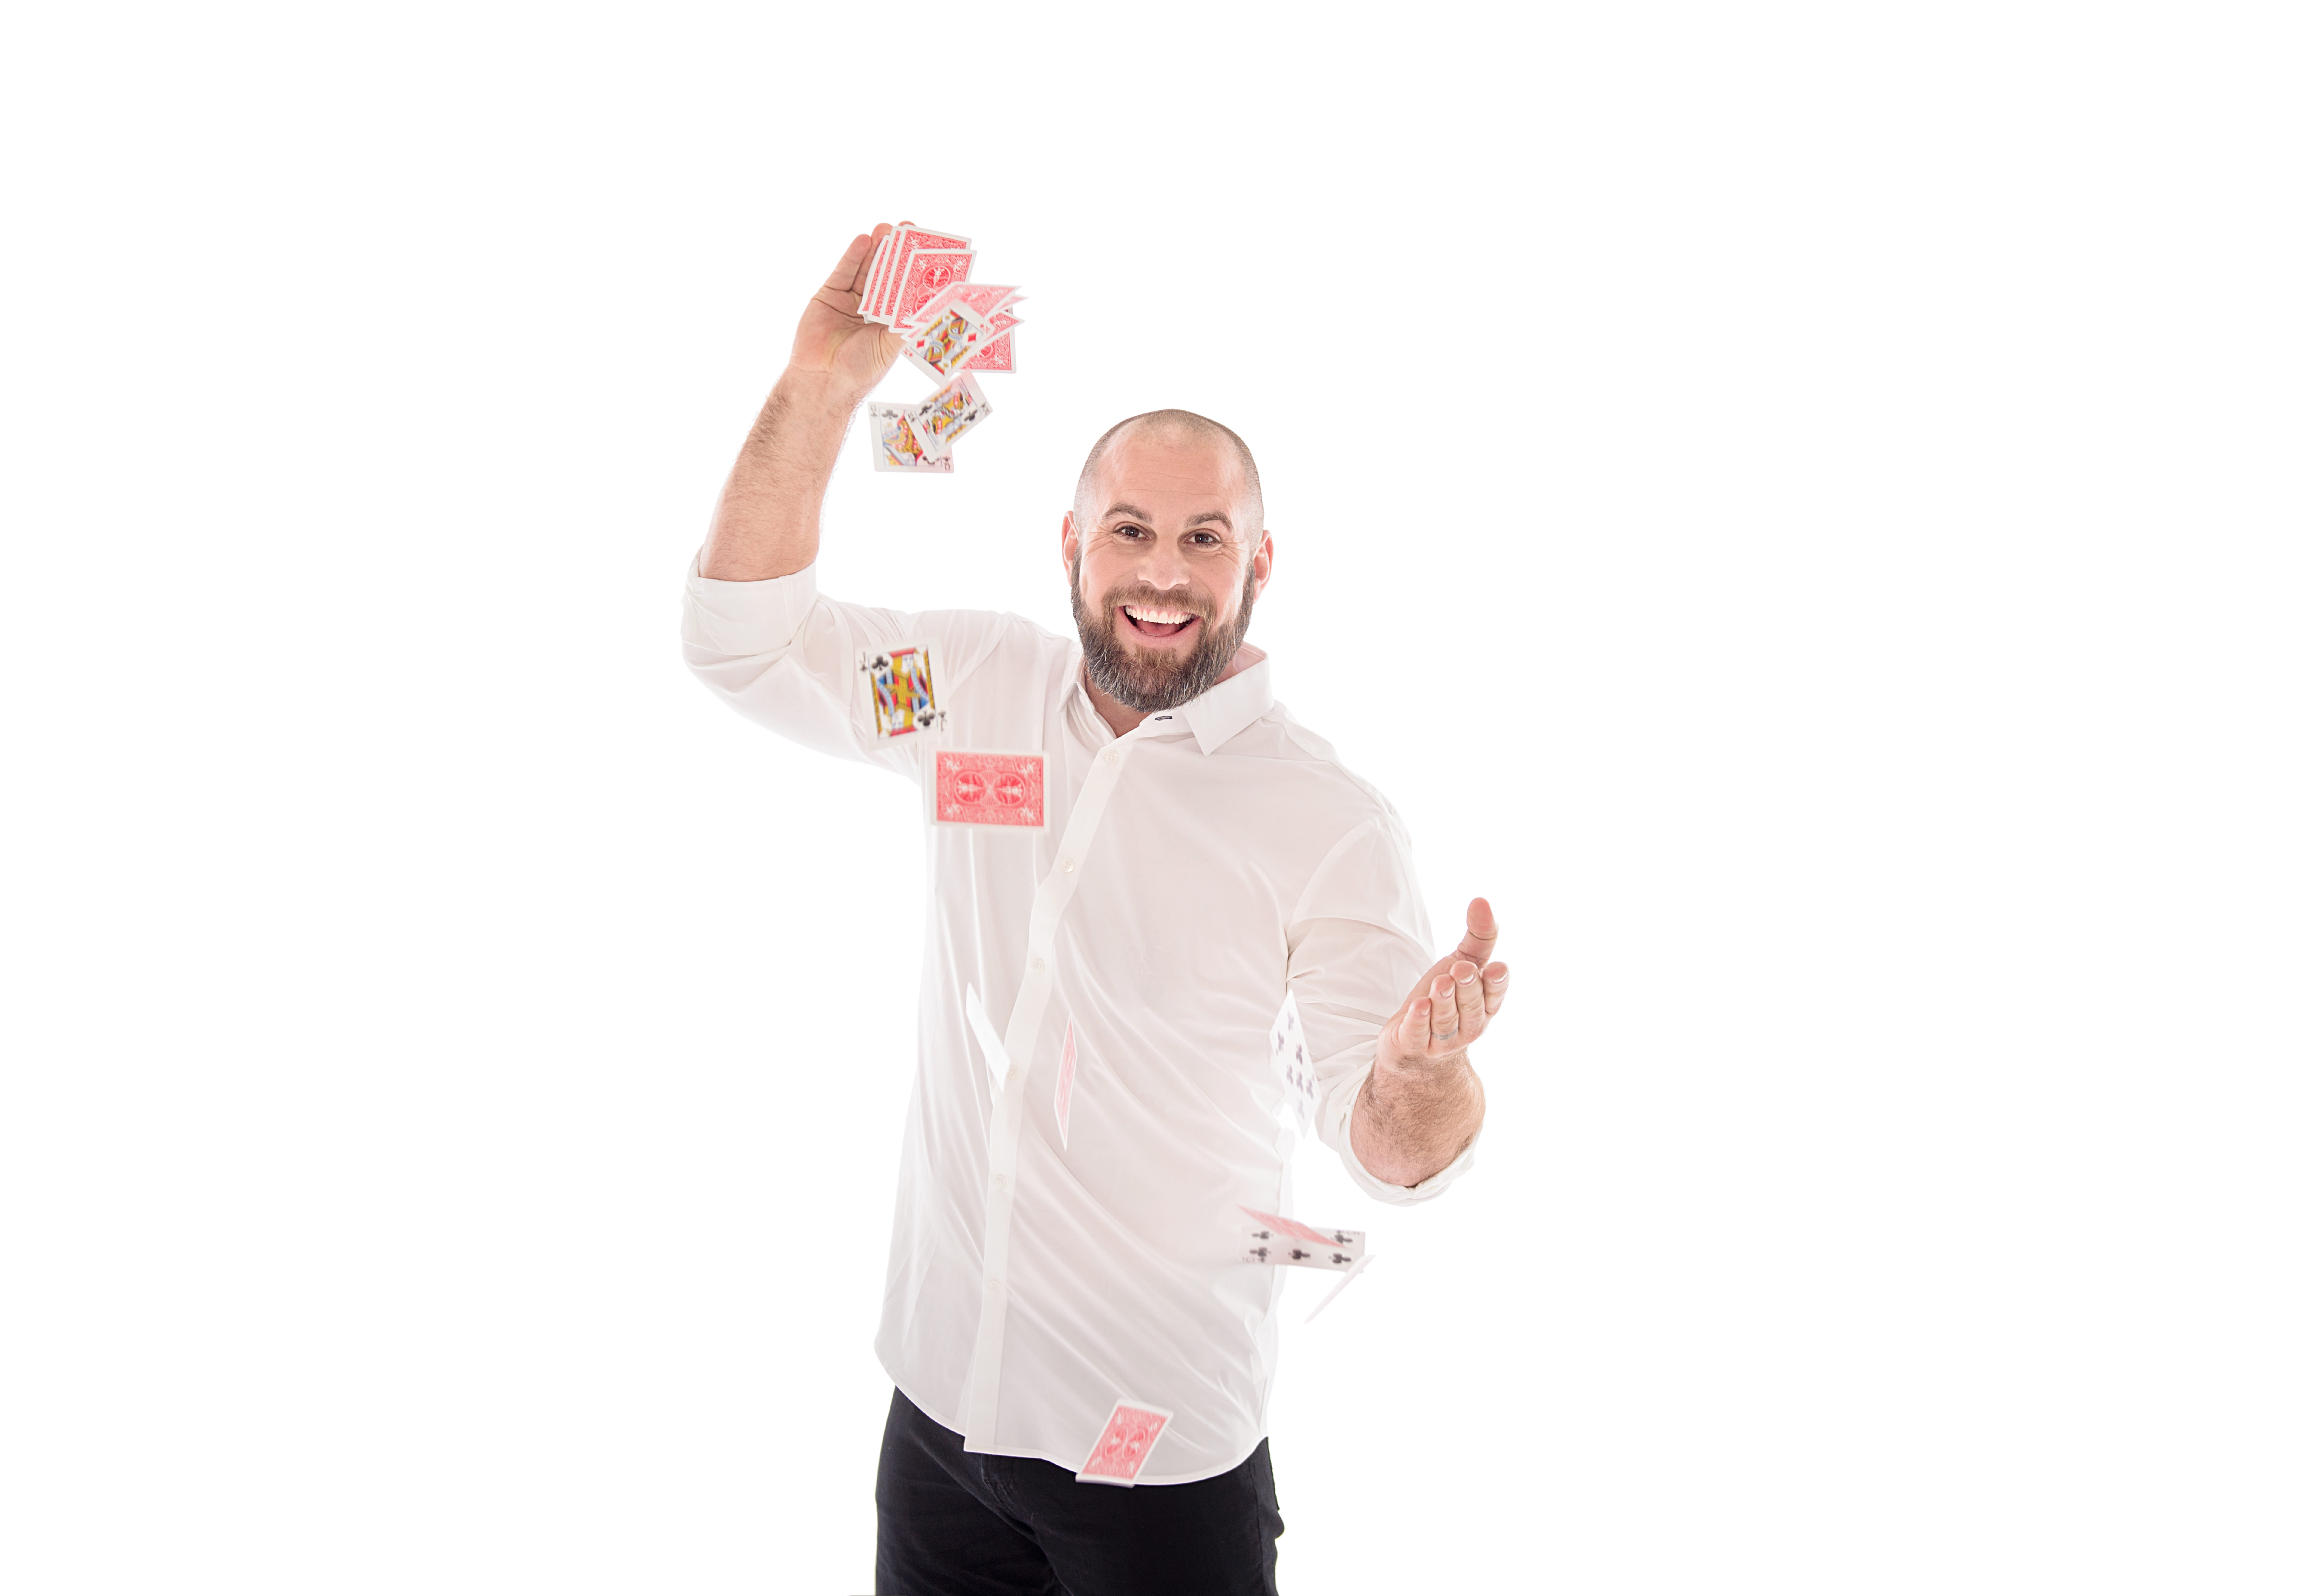 Former Eagles player and magician Jon Dorenbos with a deck of cards